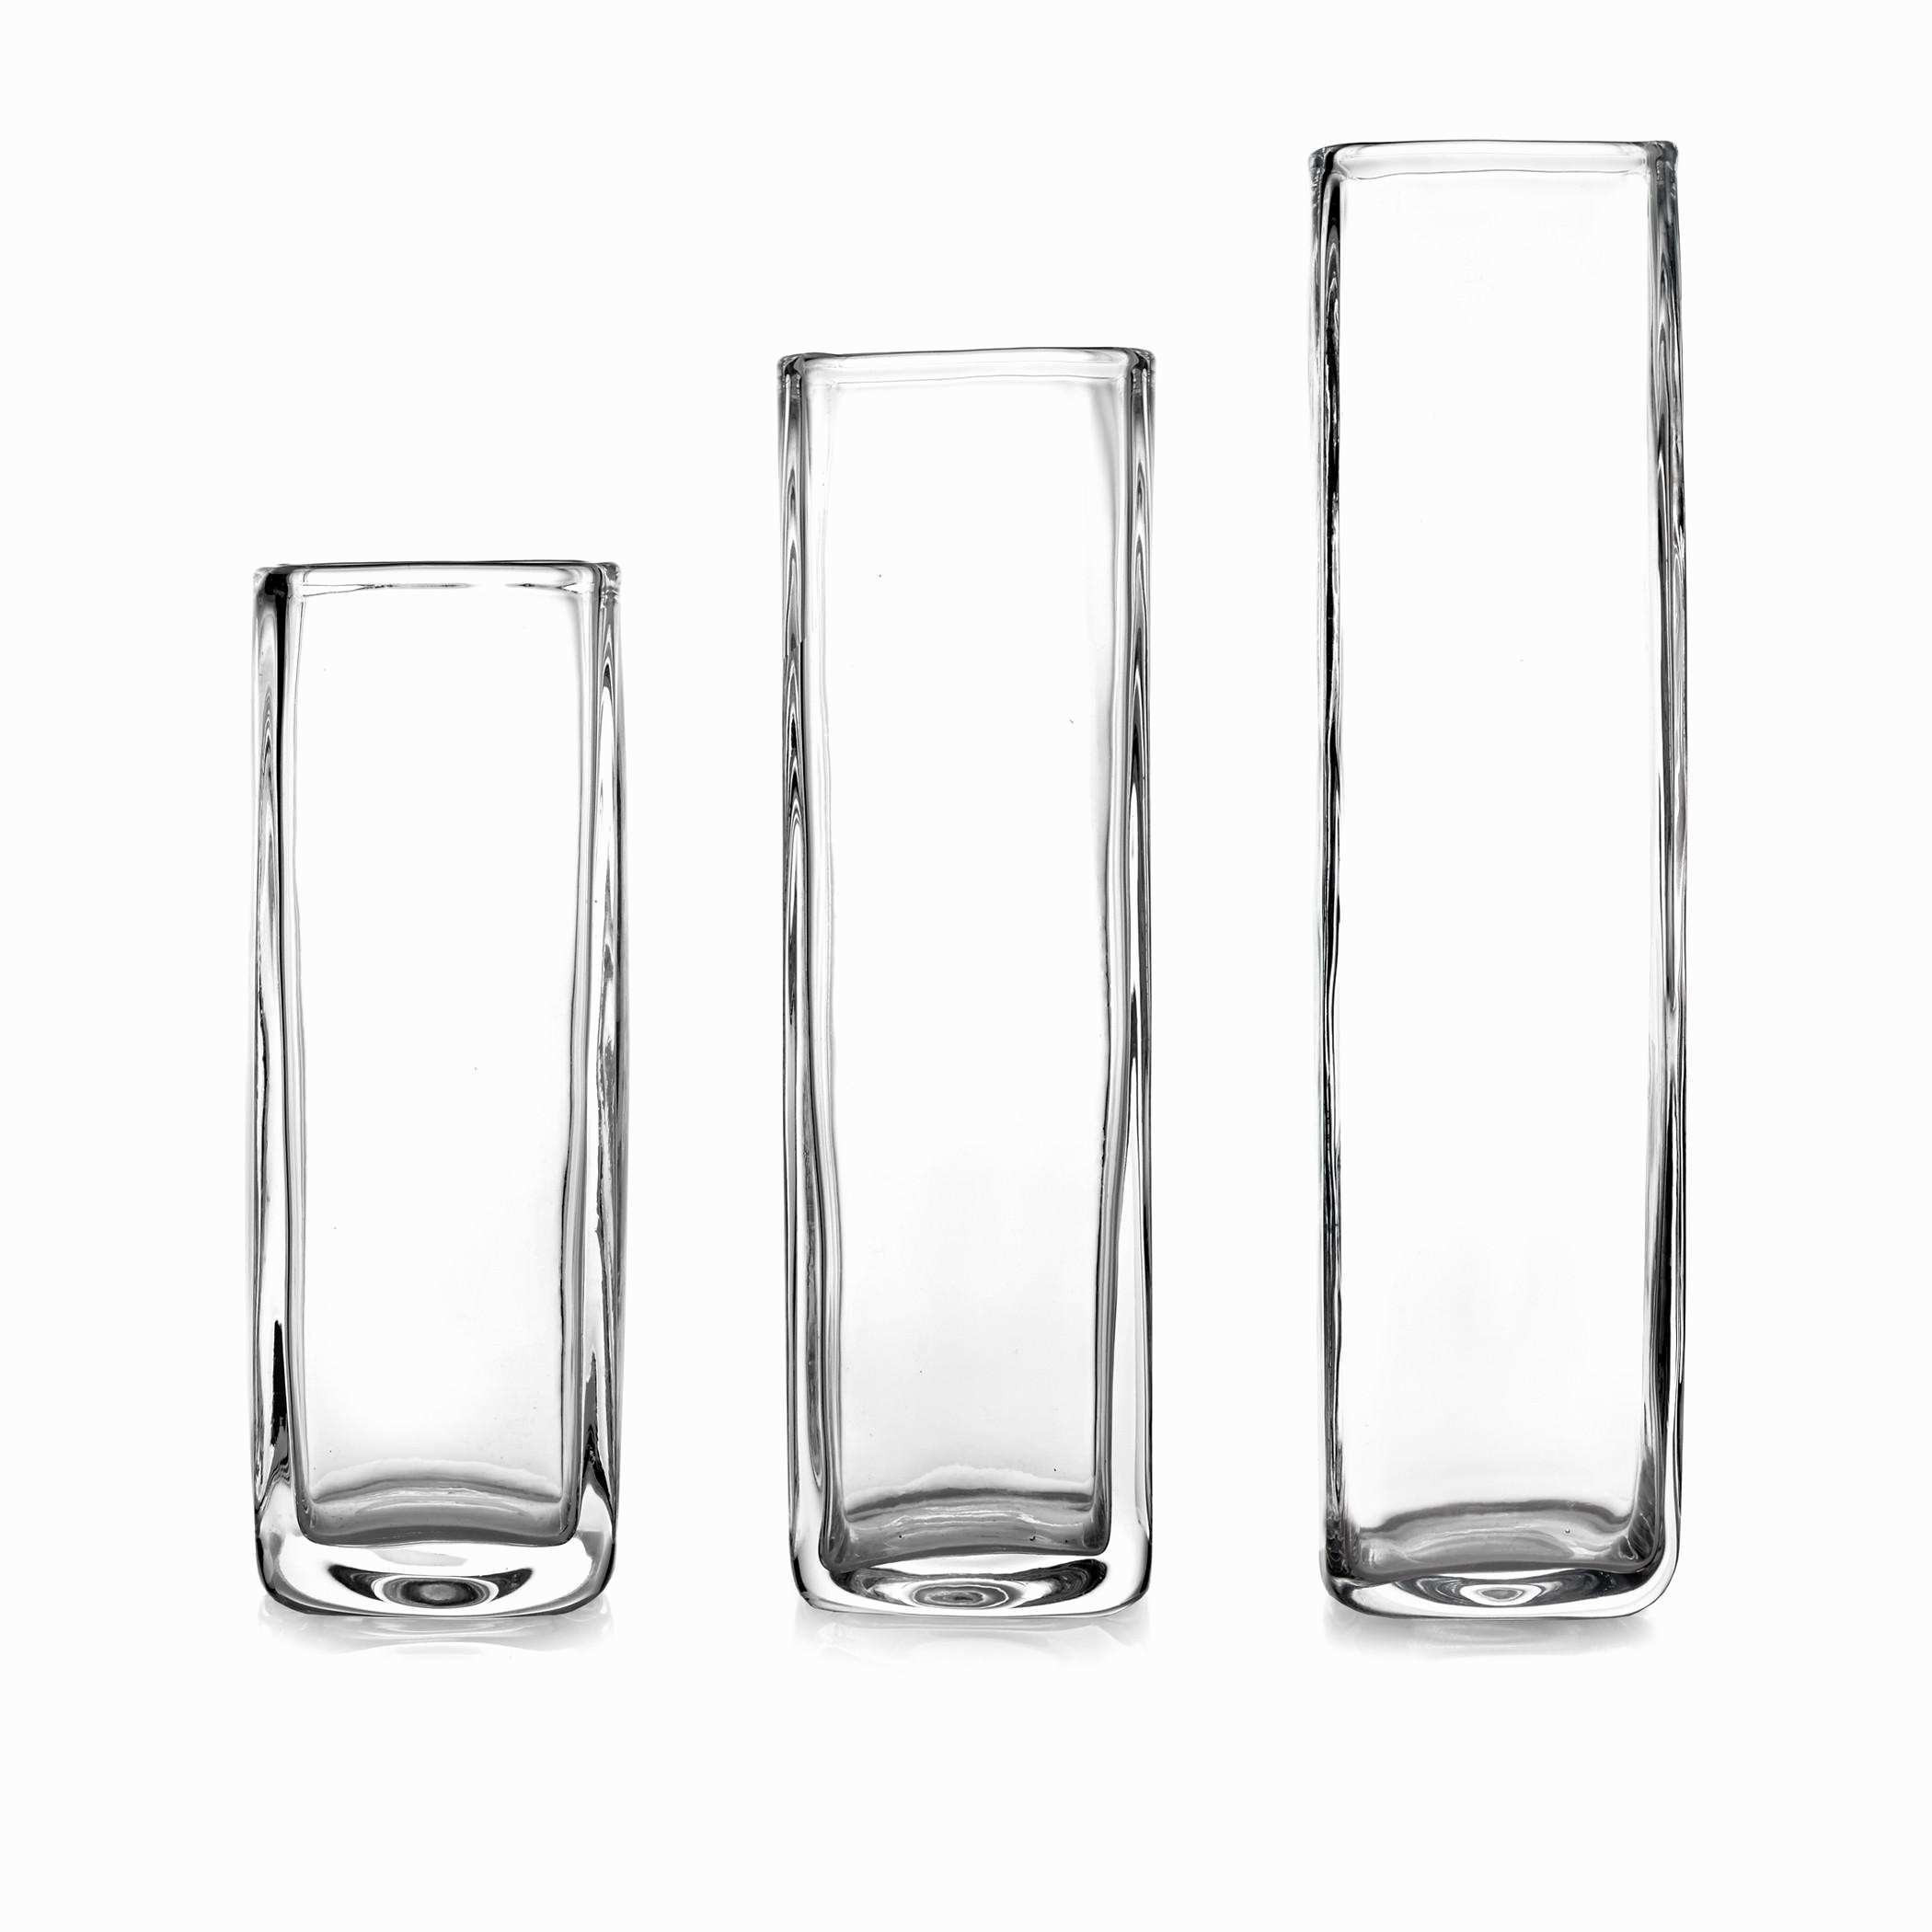 20 attractive 48 Inch Tall Floor Vases 2024 free download 48 inch tall floor vases of large glass cylinder pics glass cylinder floor lamp finest living within gallery of large glass cylinder